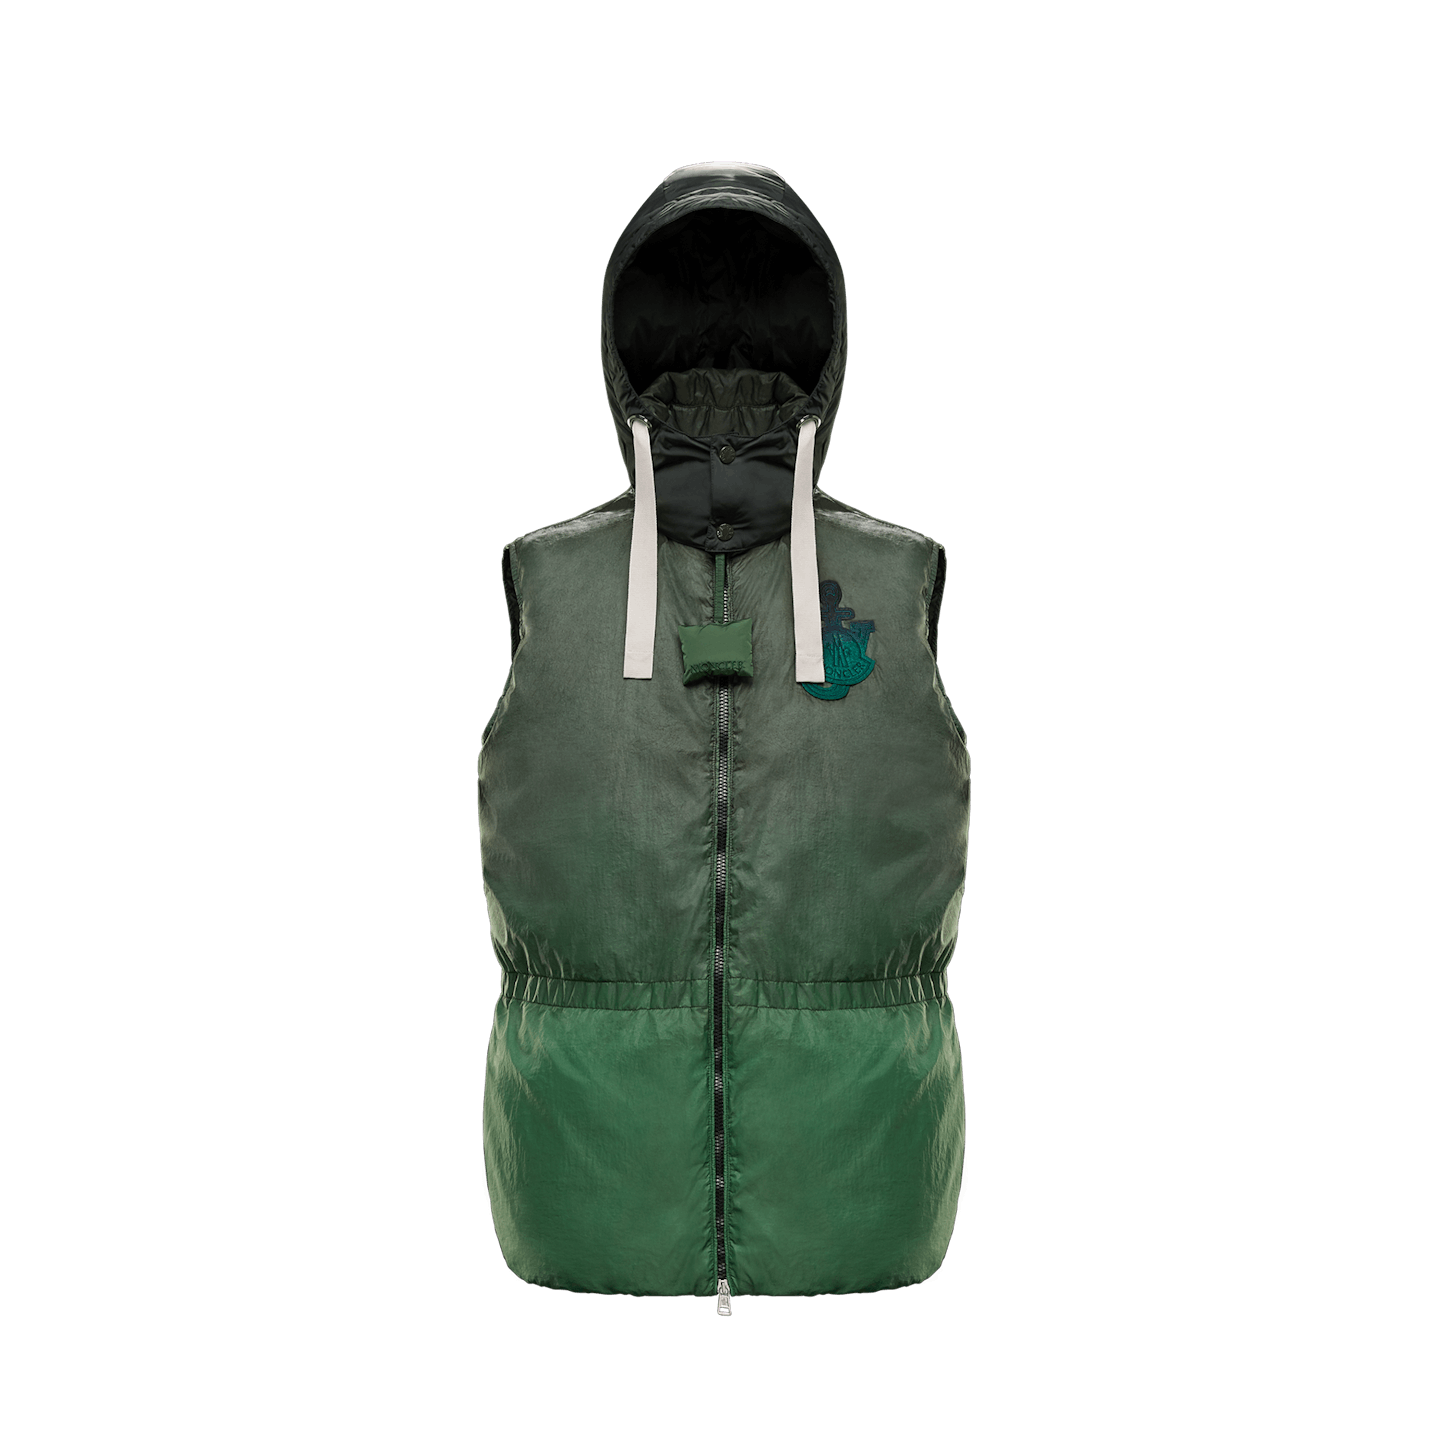 1 Moncler JW Anderson, Hooded Gilet, £770